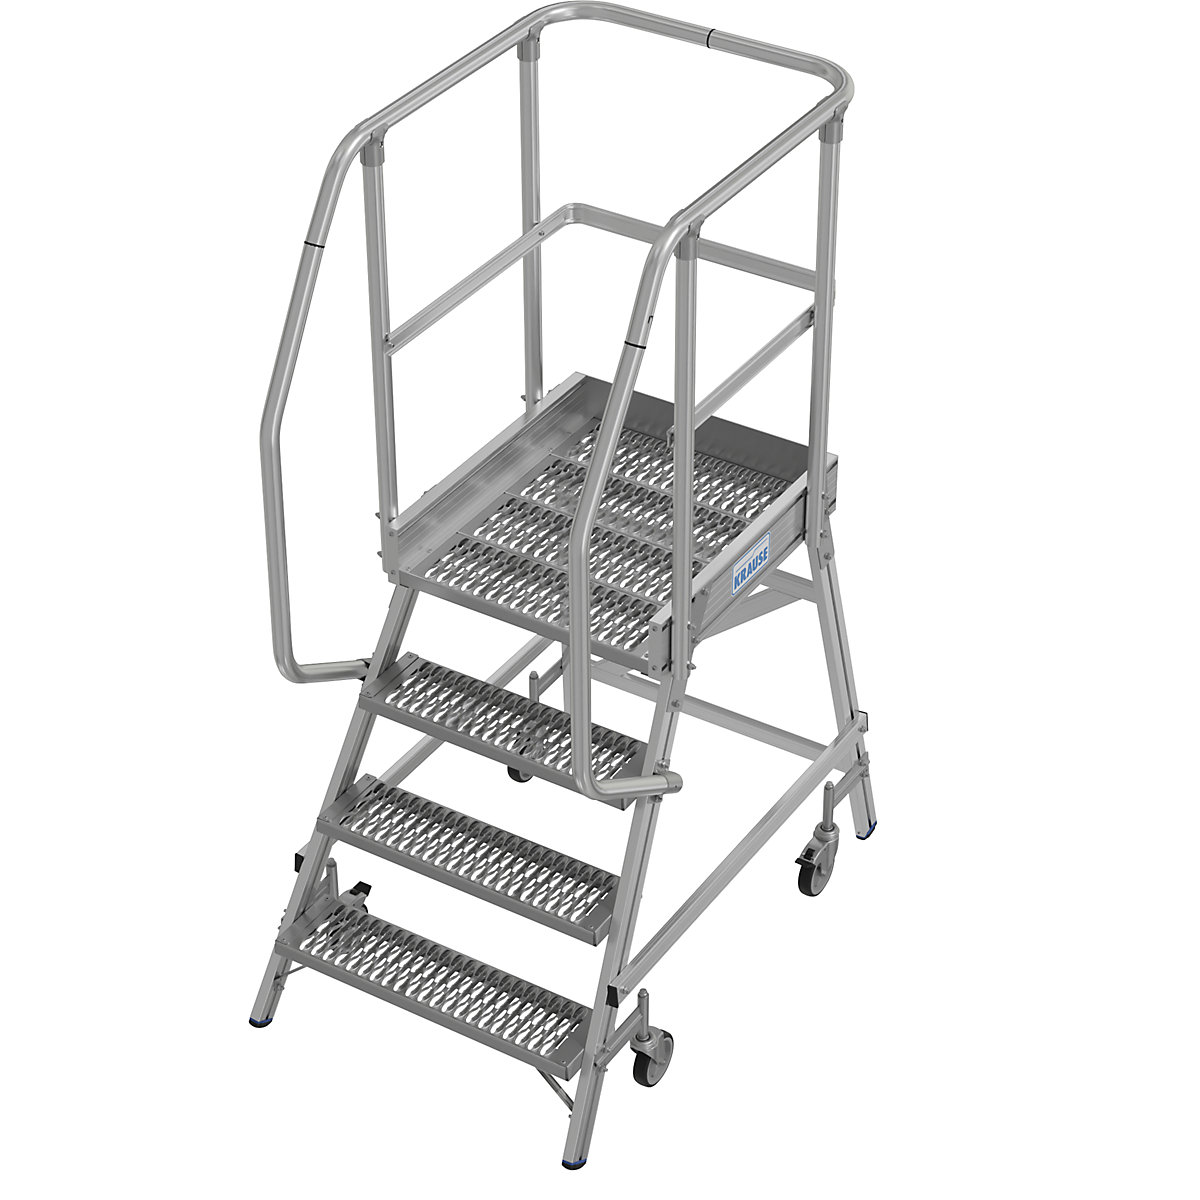 Mobile safety steps with R13 anti-slip properties – KRAUSE, with single sided access, 4 steps incl. platform-2